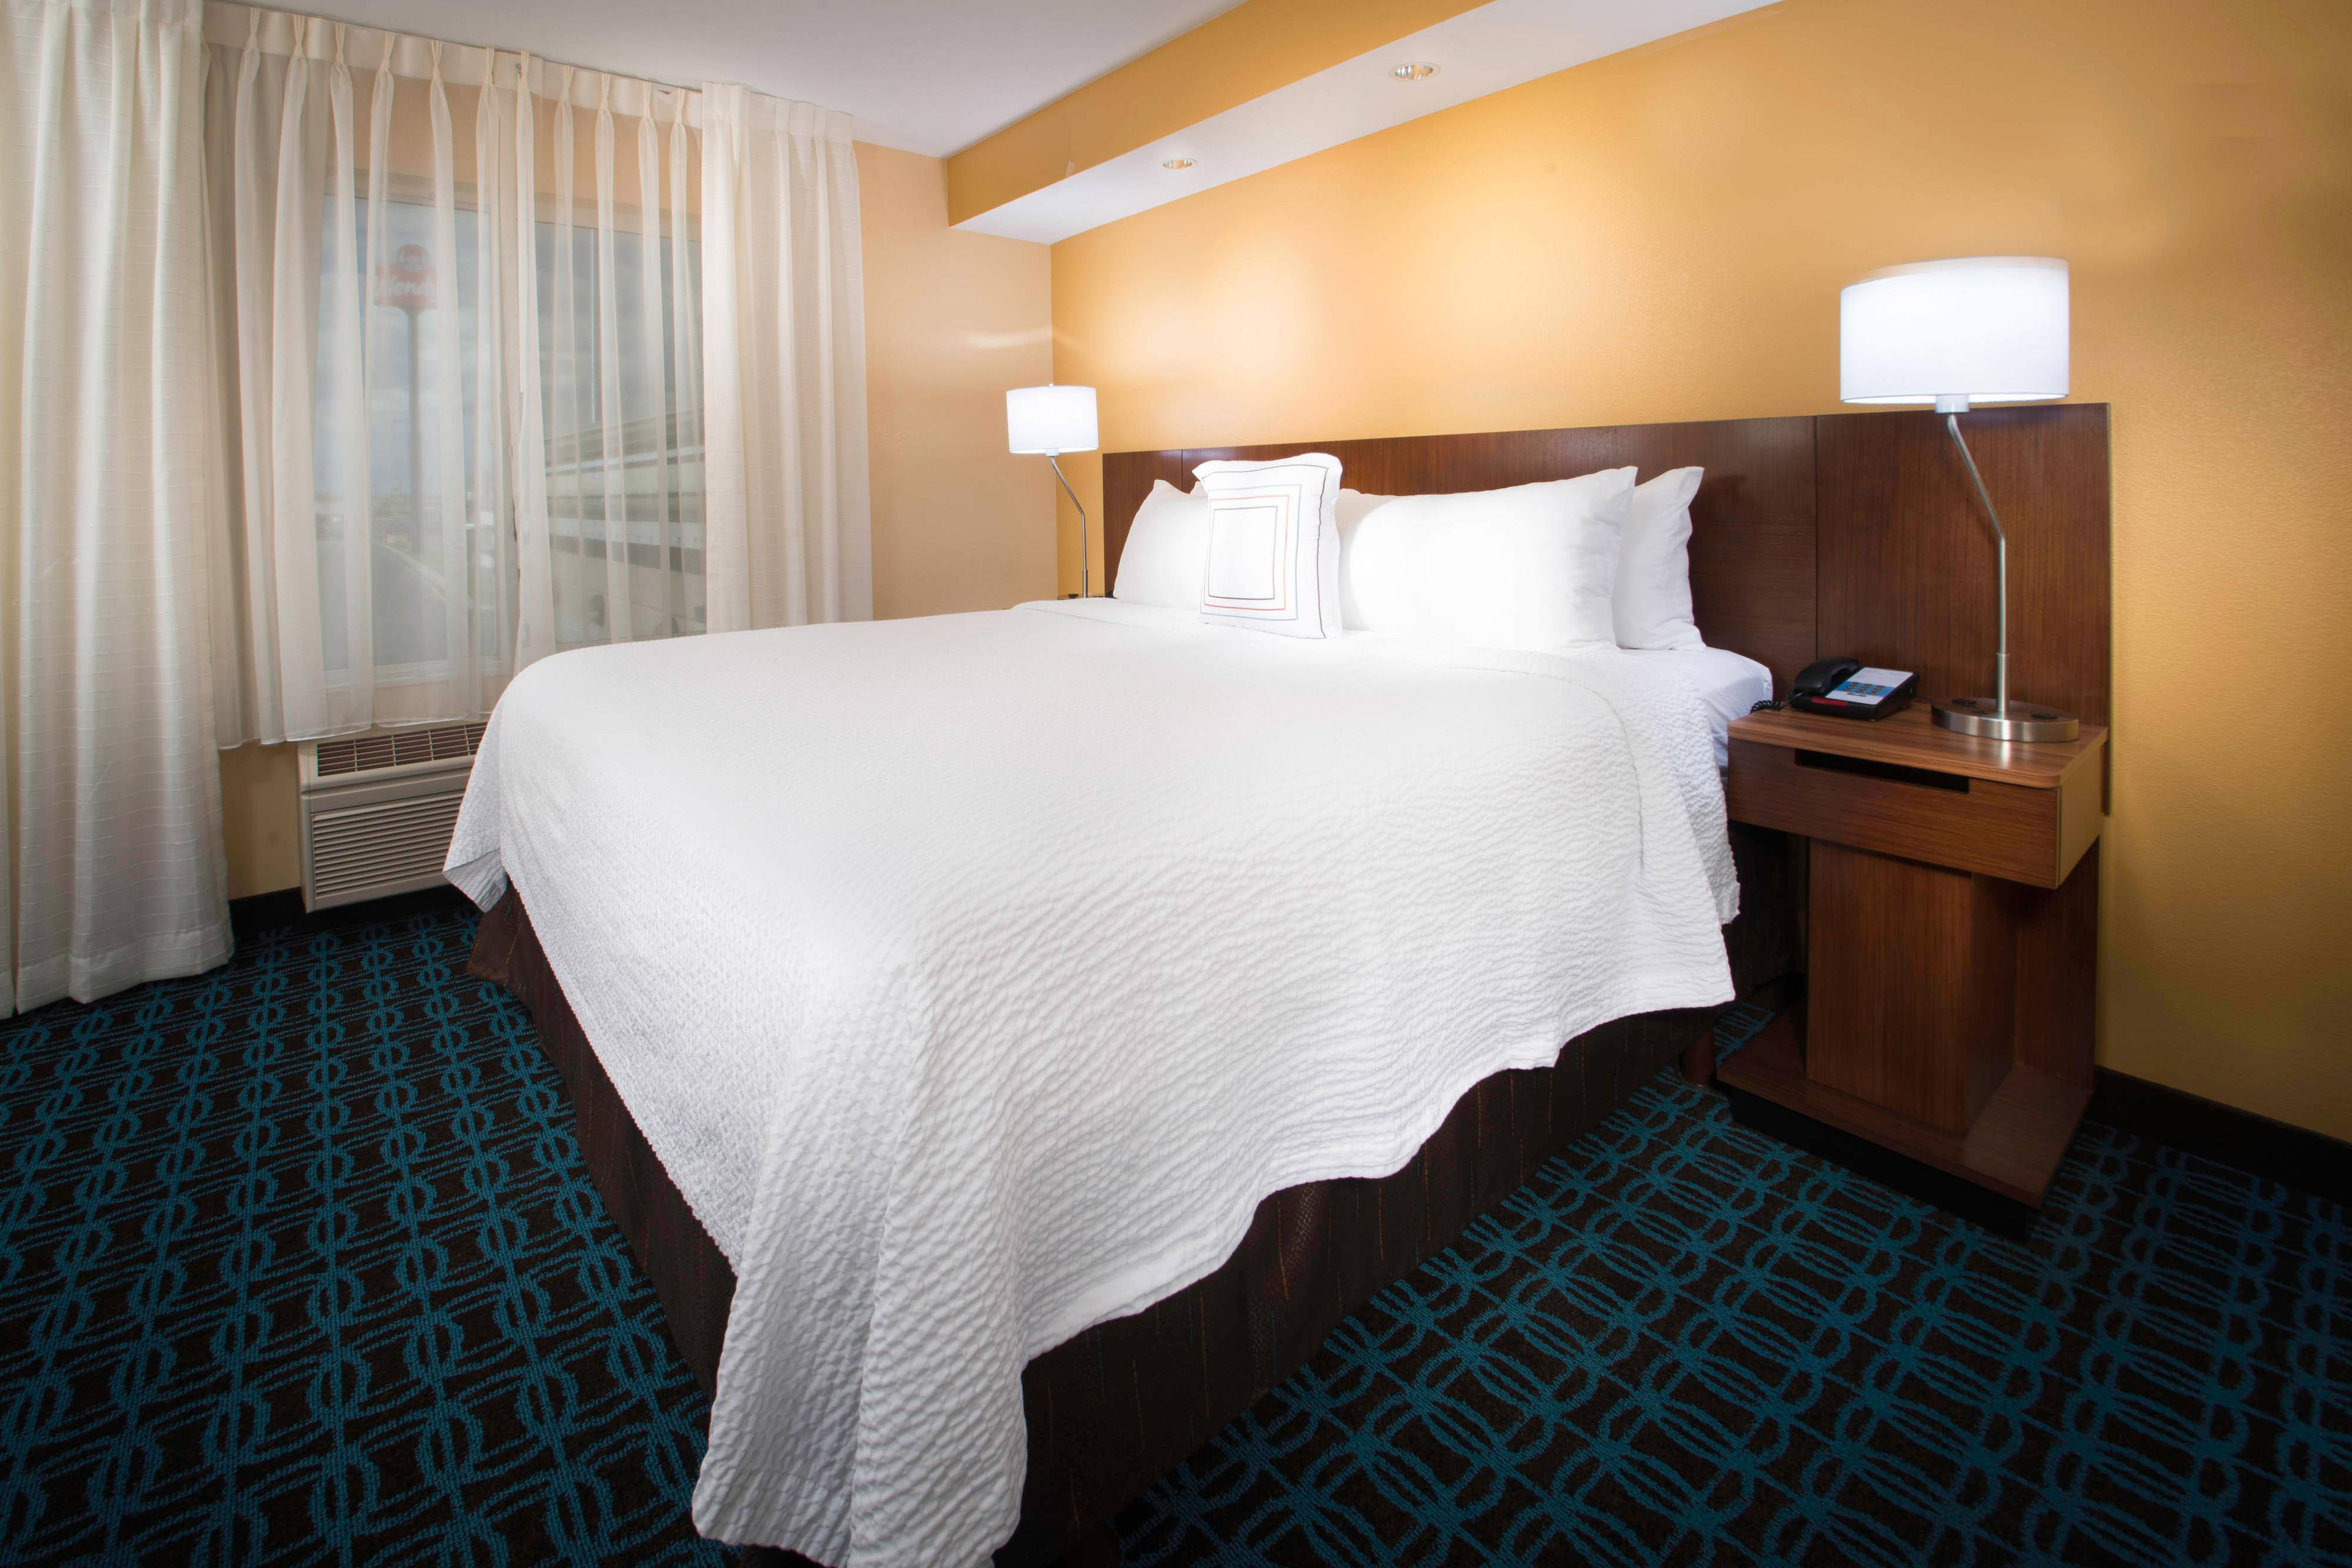 Rest assured with a clean fresh room with our crisp spa white linens.